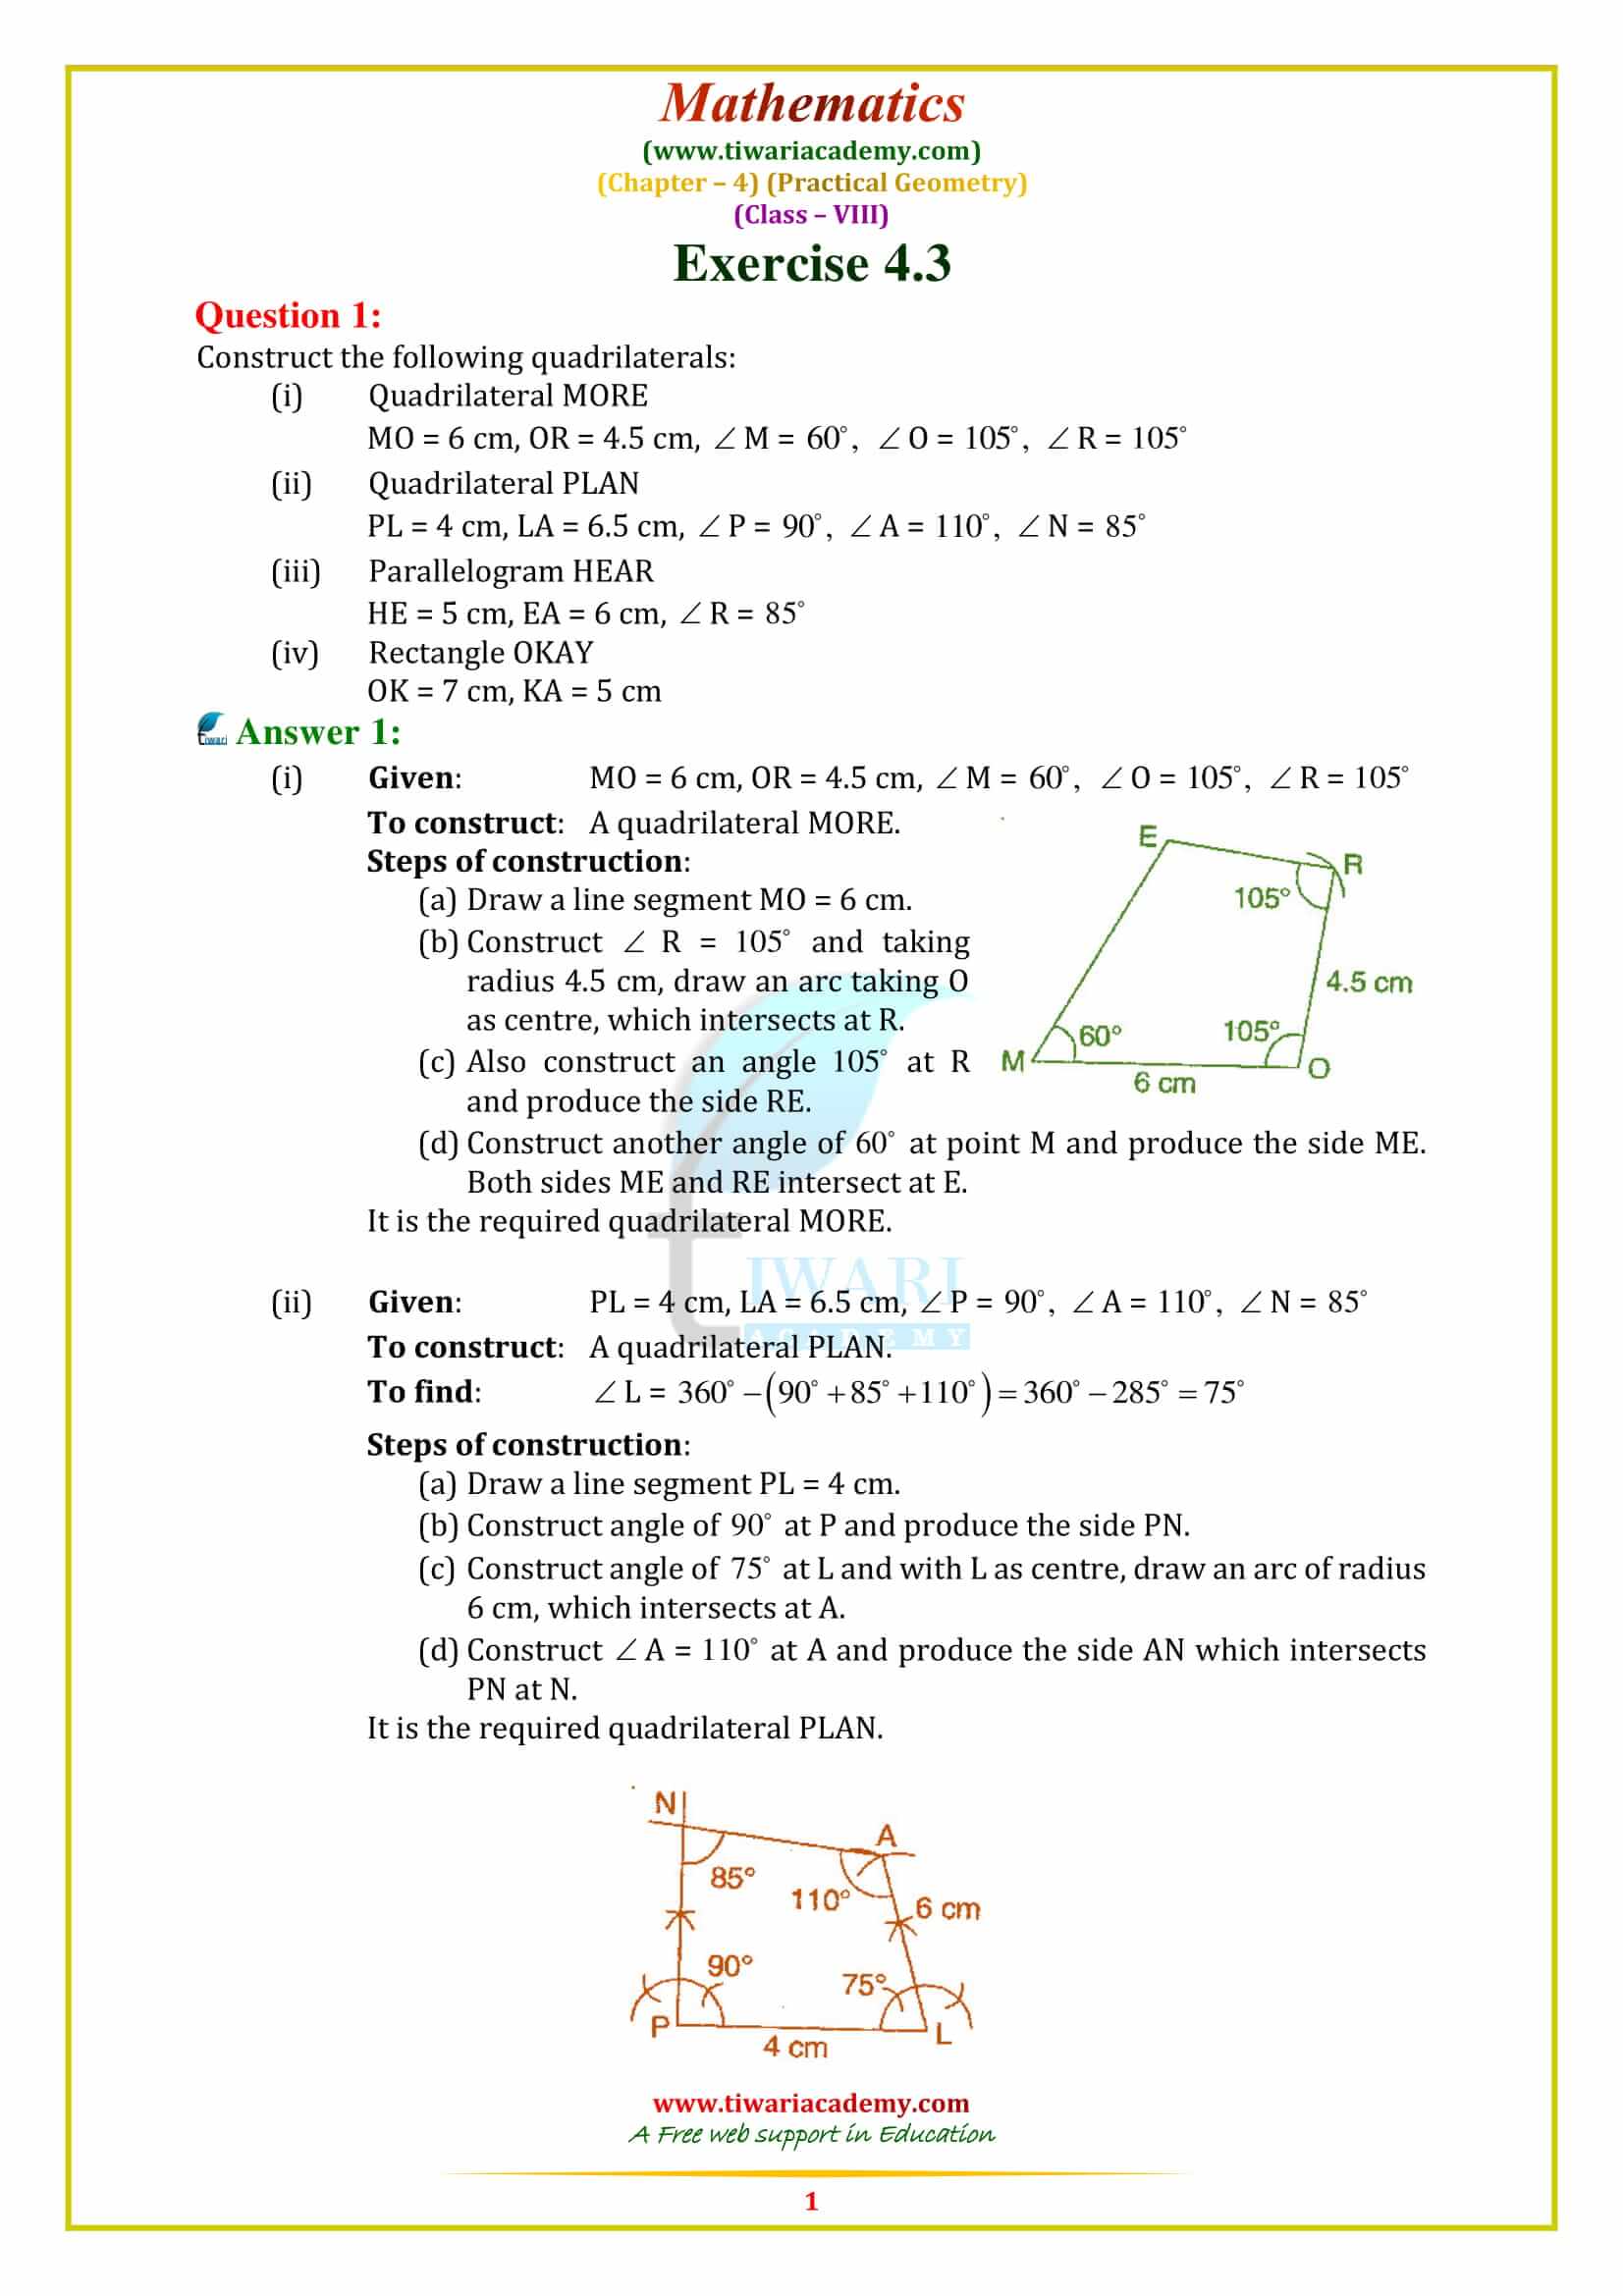 NCERT Solutions for Class 8 Maths Chapter 4 Exercise 4.3 in pdf form free